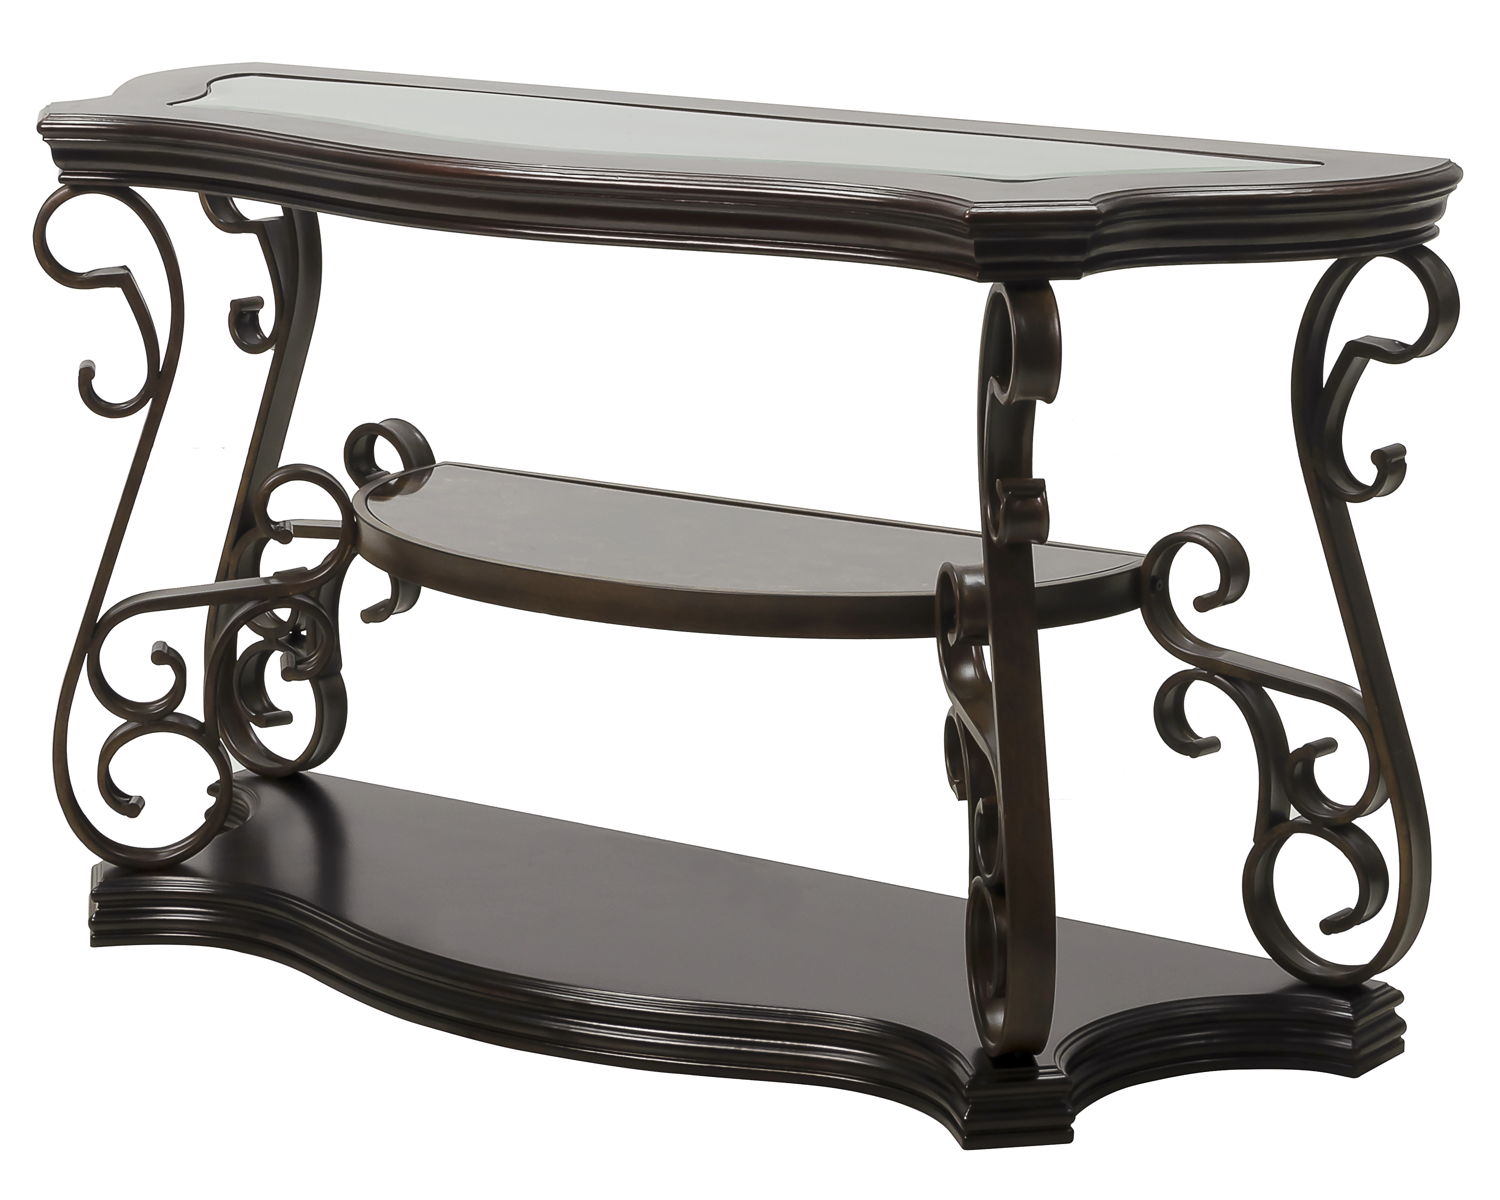 Sofa Table, Glass Table Top, MDF With Marble Paper Middle Shelf, Powder Coat Finish Metal Legs (54" Lx20" Wx30" H)